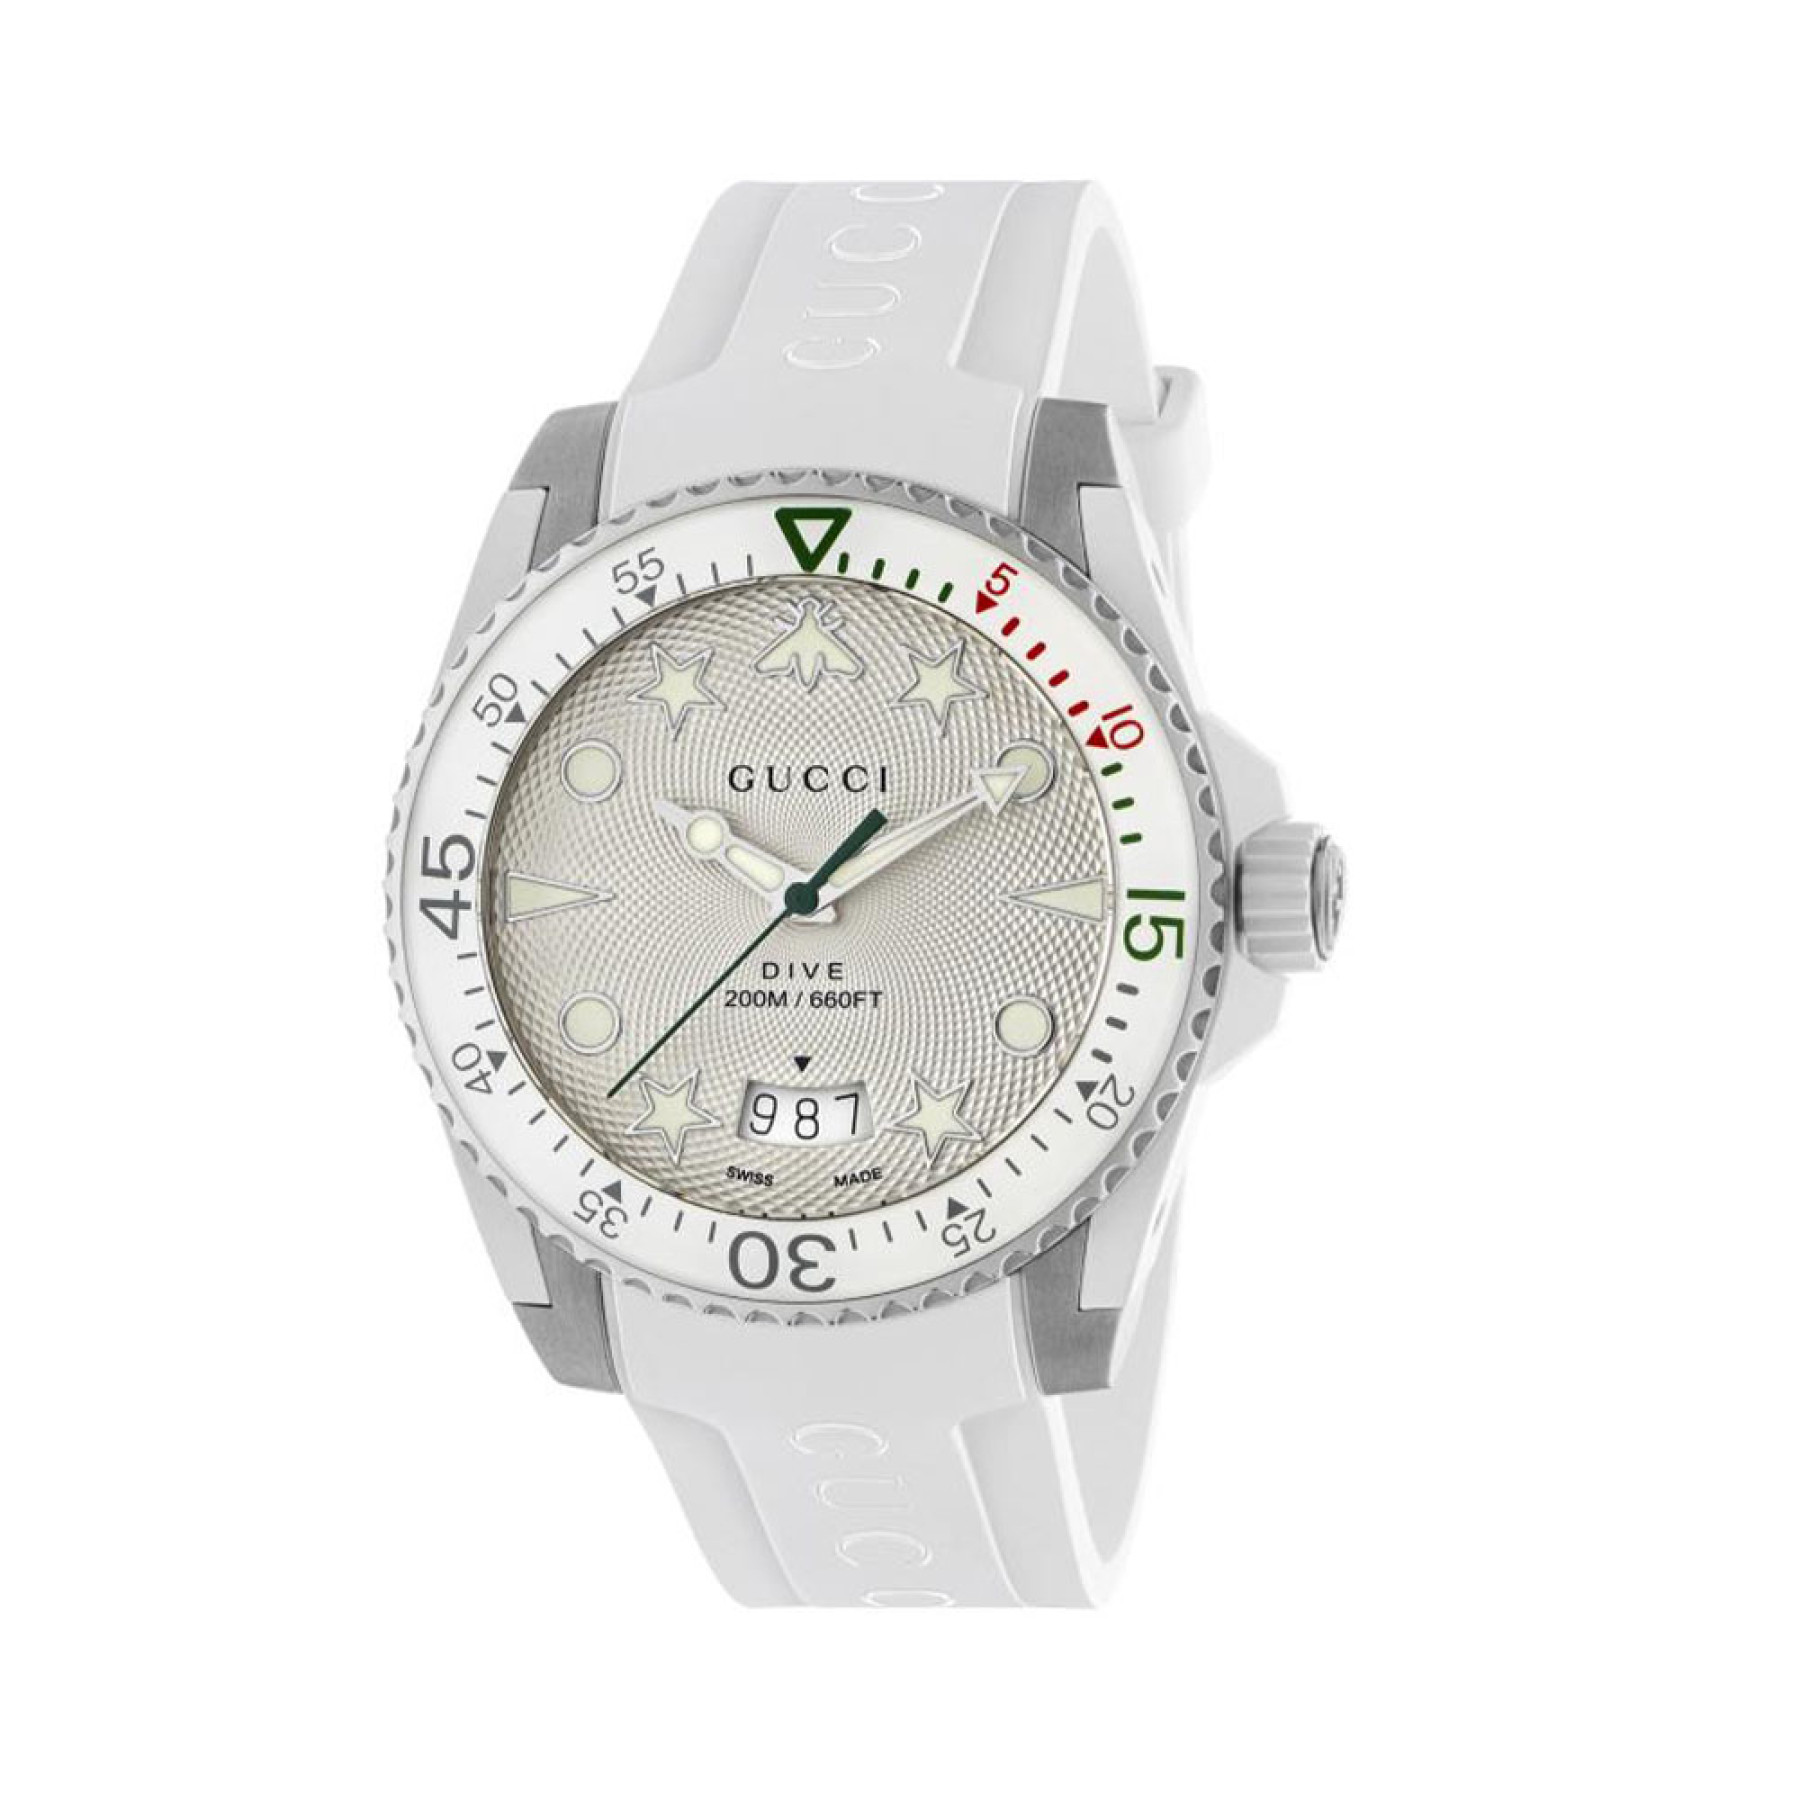 GUCCI Dive Watch | Official Authorized Retailer